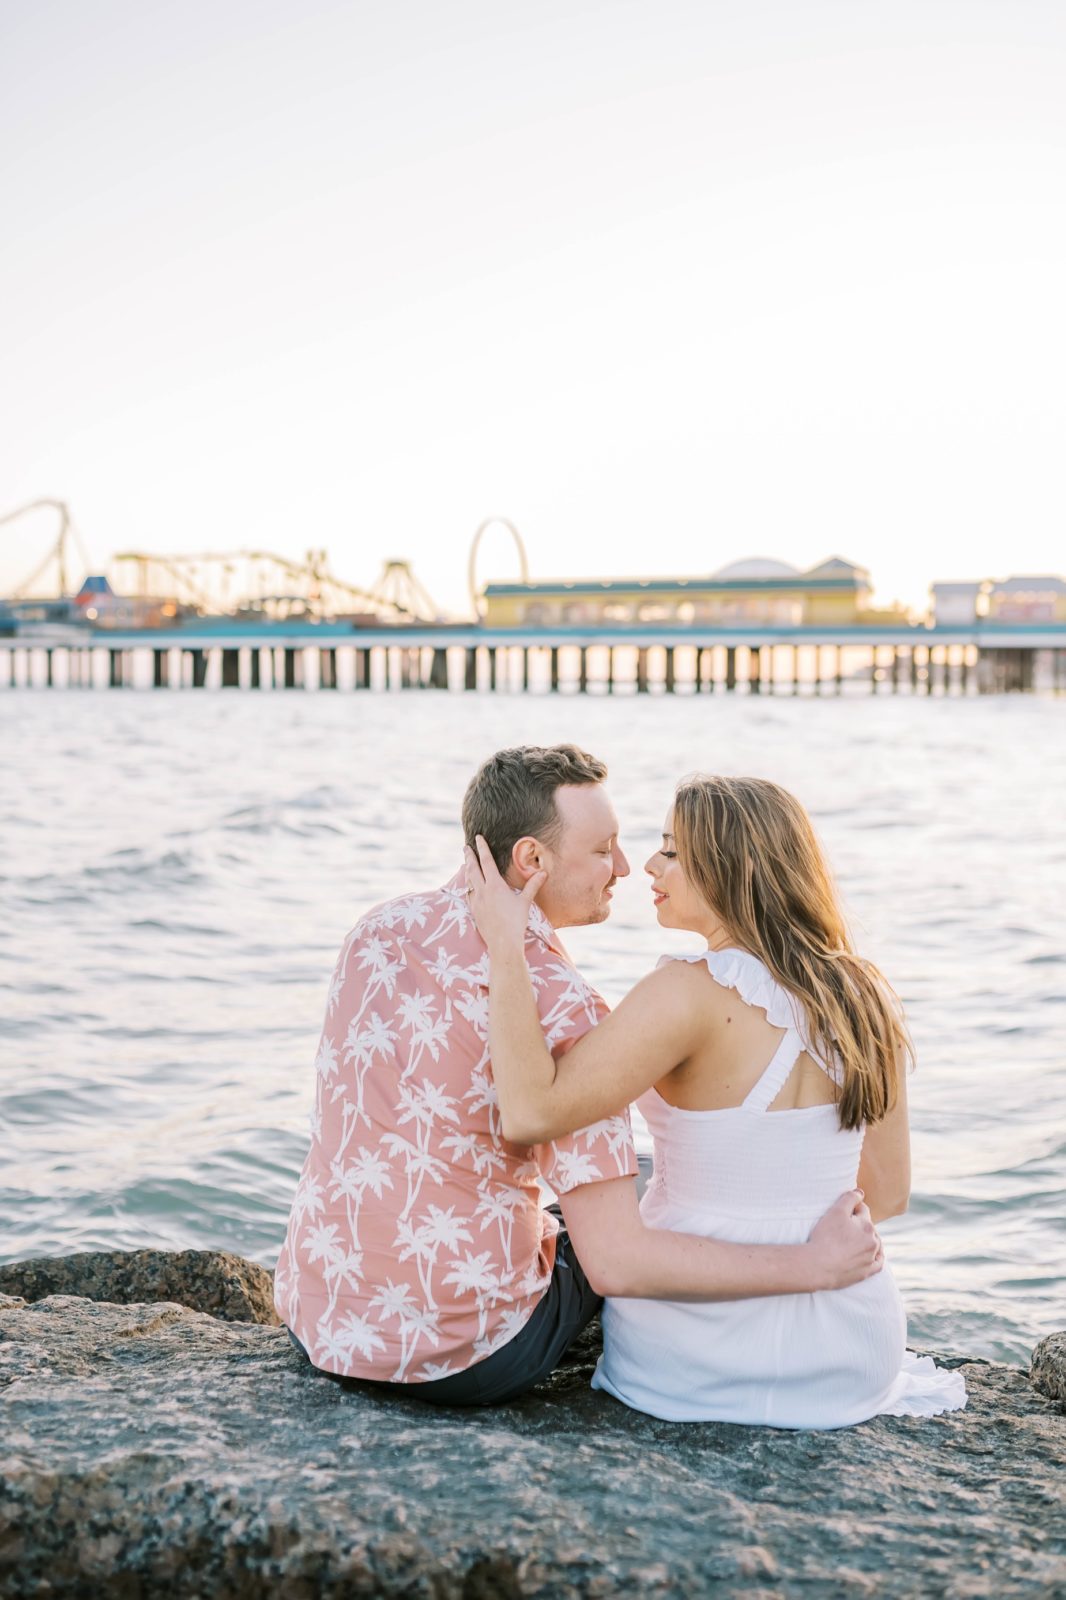 With an oceanside rollercoaster in the background an engaged couple kisses by Christina Elliott Photography. pier rollercoaster in love #ChristinaElliottPhotography #ChristinaElliottEngagements #TheTremontHouse #Texasengagements #shesaidyes